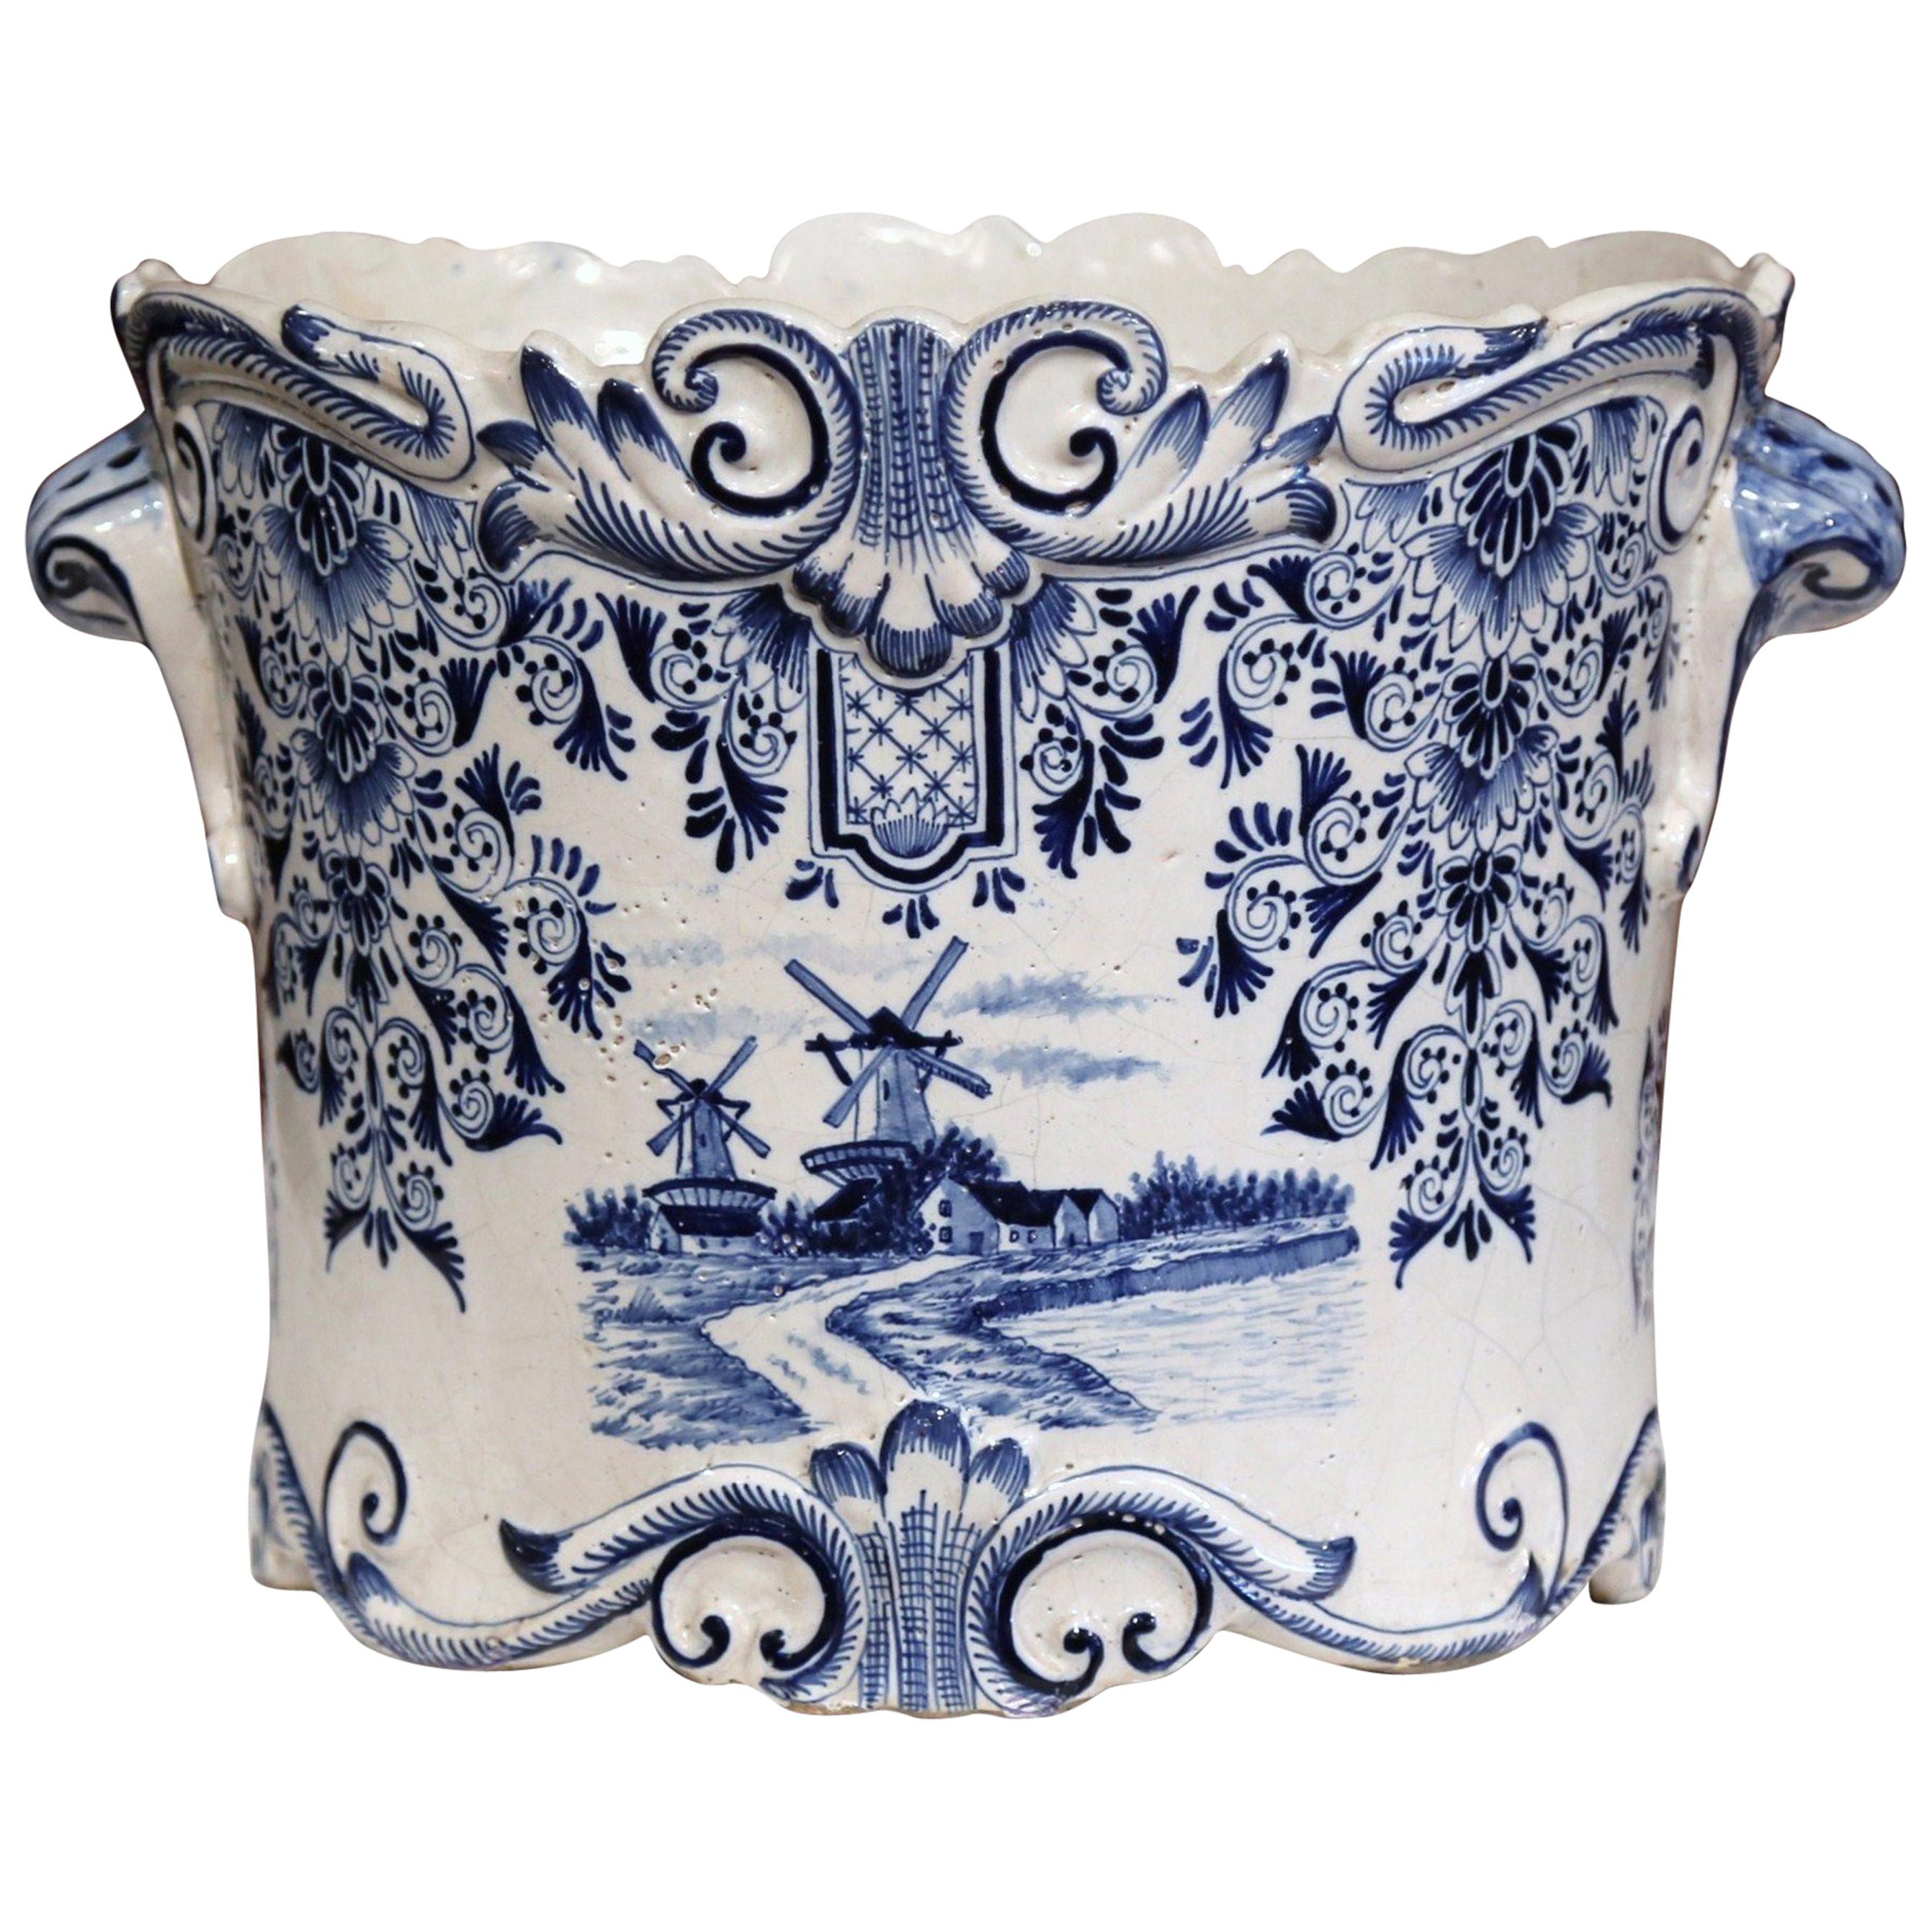 Large 18th Century French Hand-Painted Blue and White Ceramic Delft Cachepot